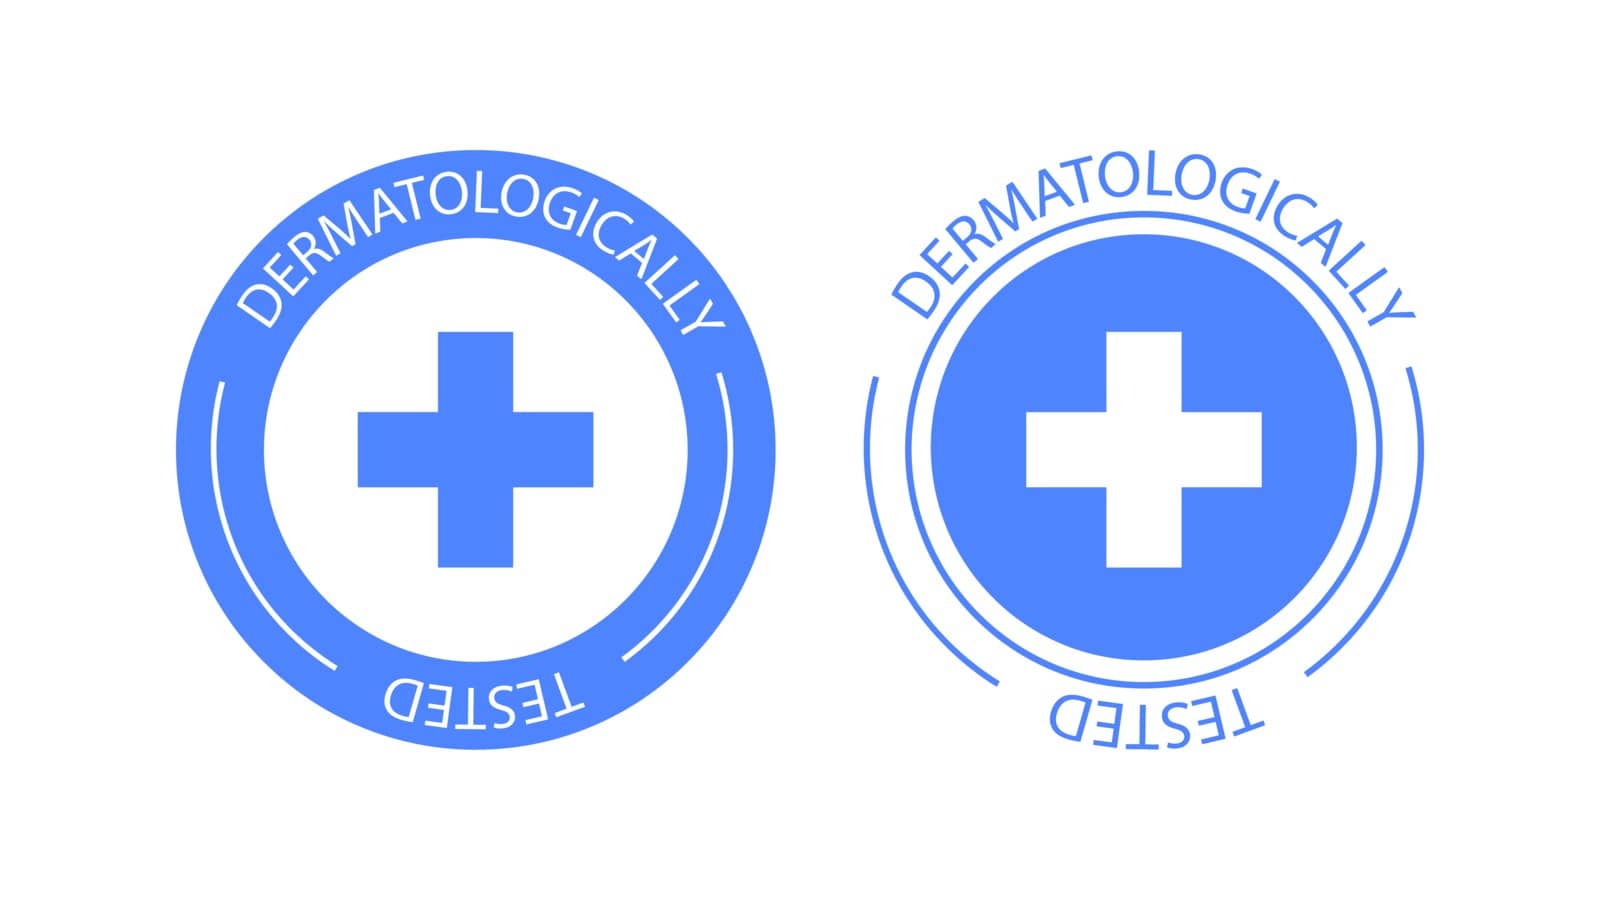 Dermatologically tested vector label logo. Dermatology test and dermatologist clinically proven icon for allergy free and healthy safe product package tag